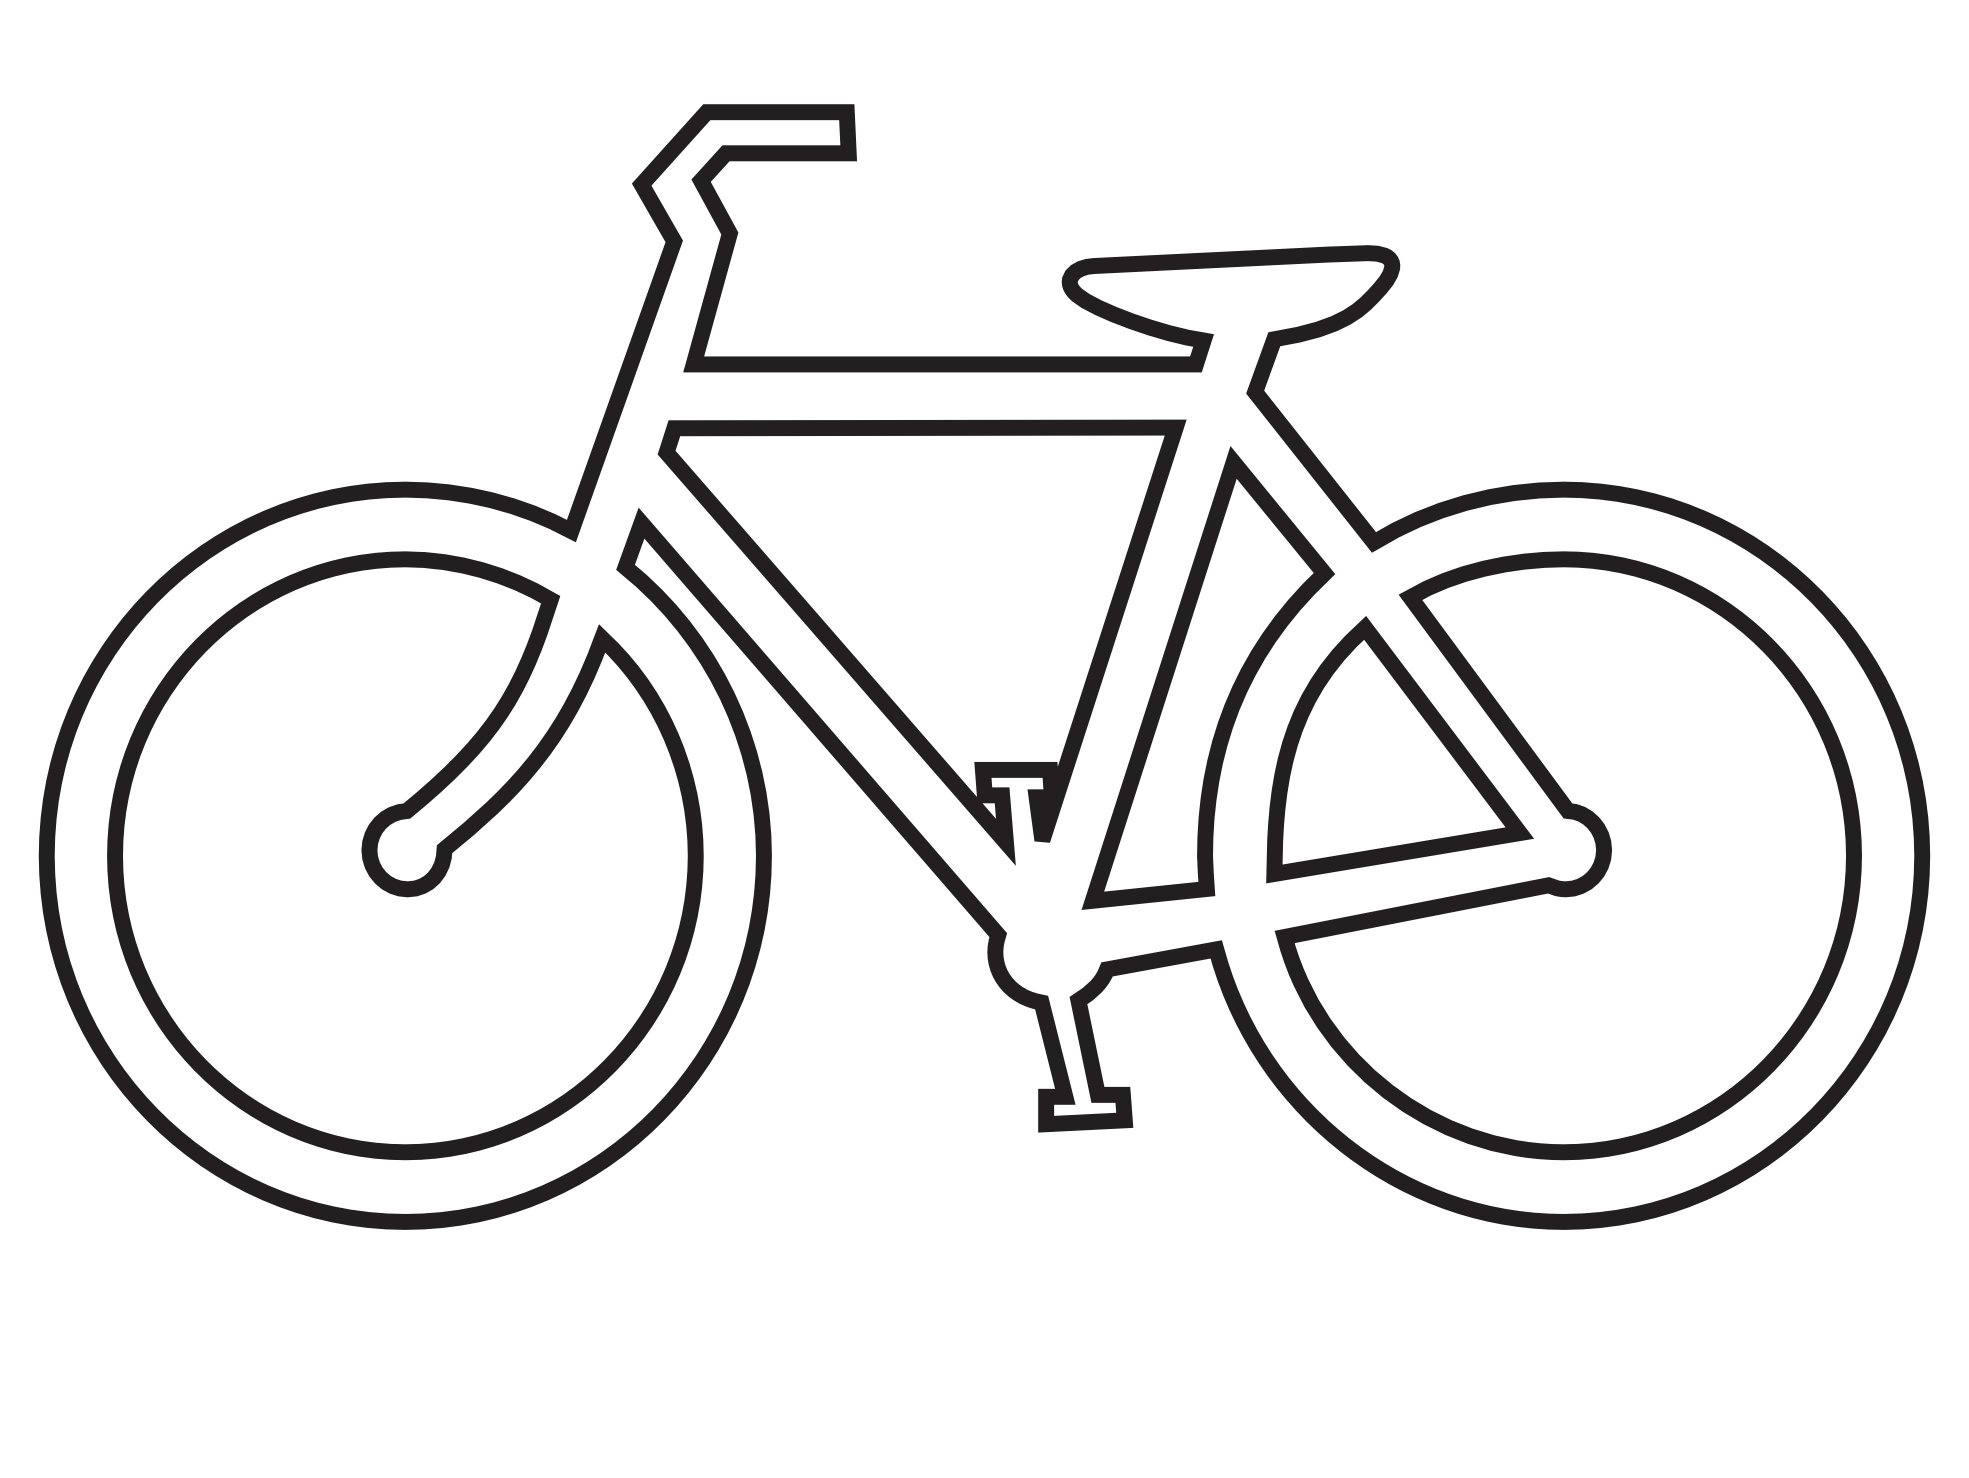 Clip Art: bicycle route sign black white line.